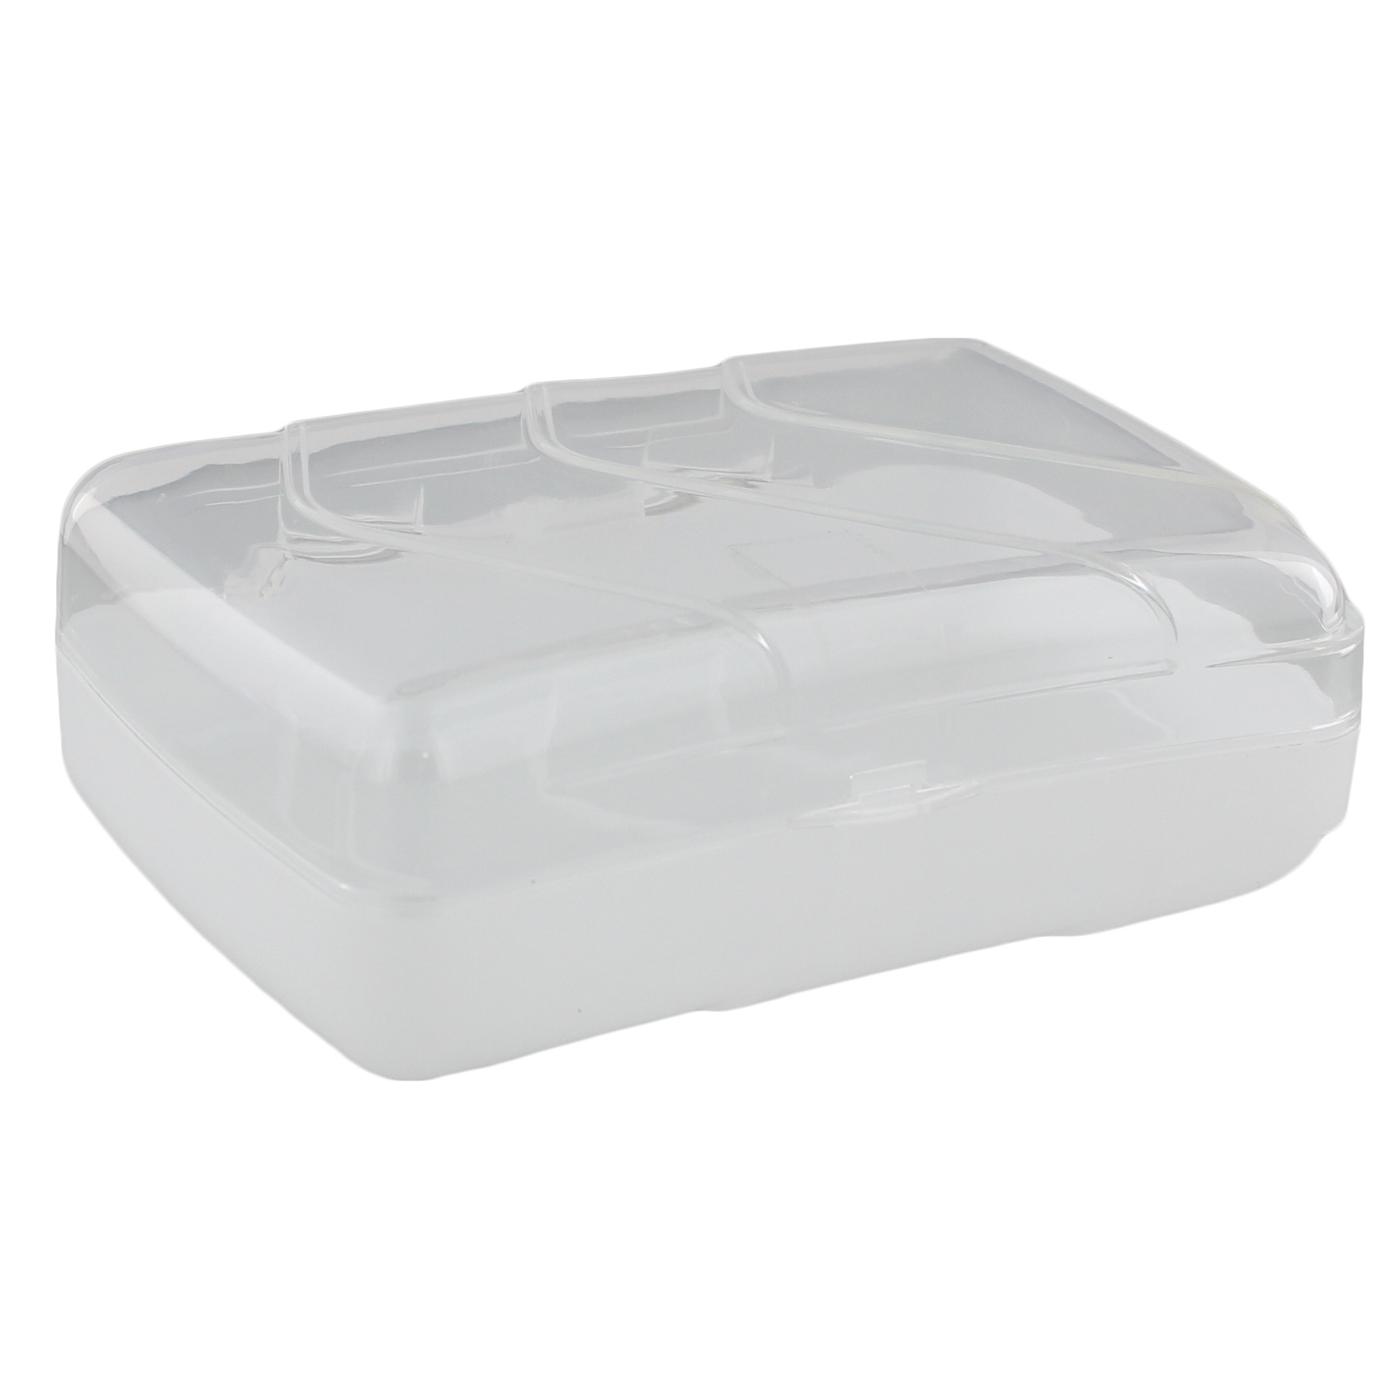 Sprayco Travel Guard Hinged Soap Dish - Assorted; image 2 of 5